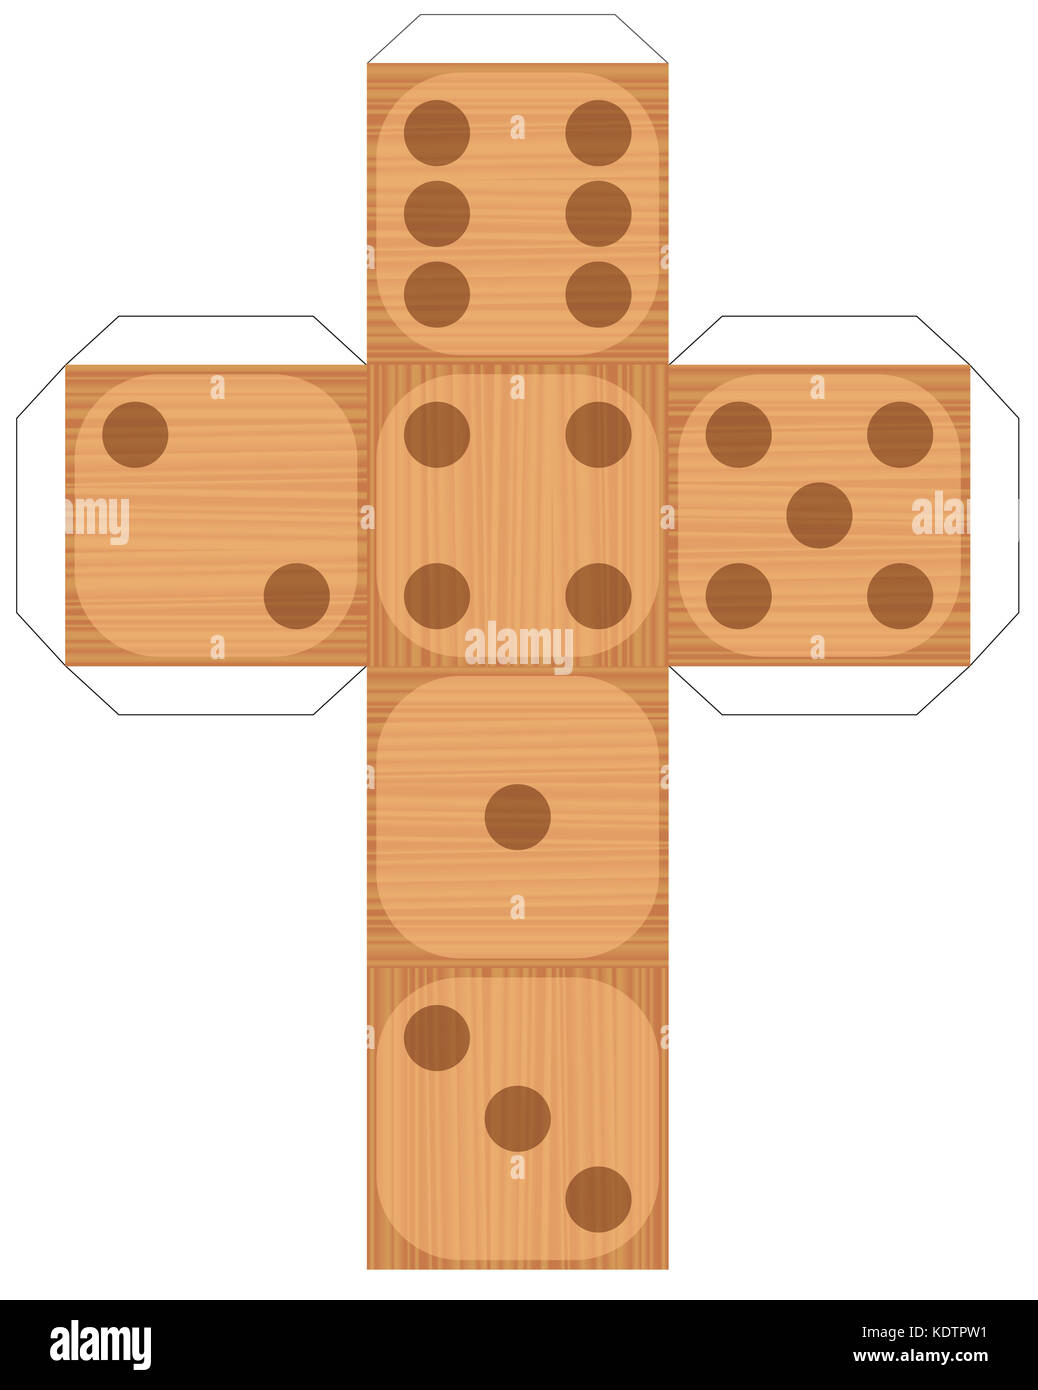 Dice template - model of a wood style cube to make a three-dimensional wooden textured handicraft work out of it. Stock Photo